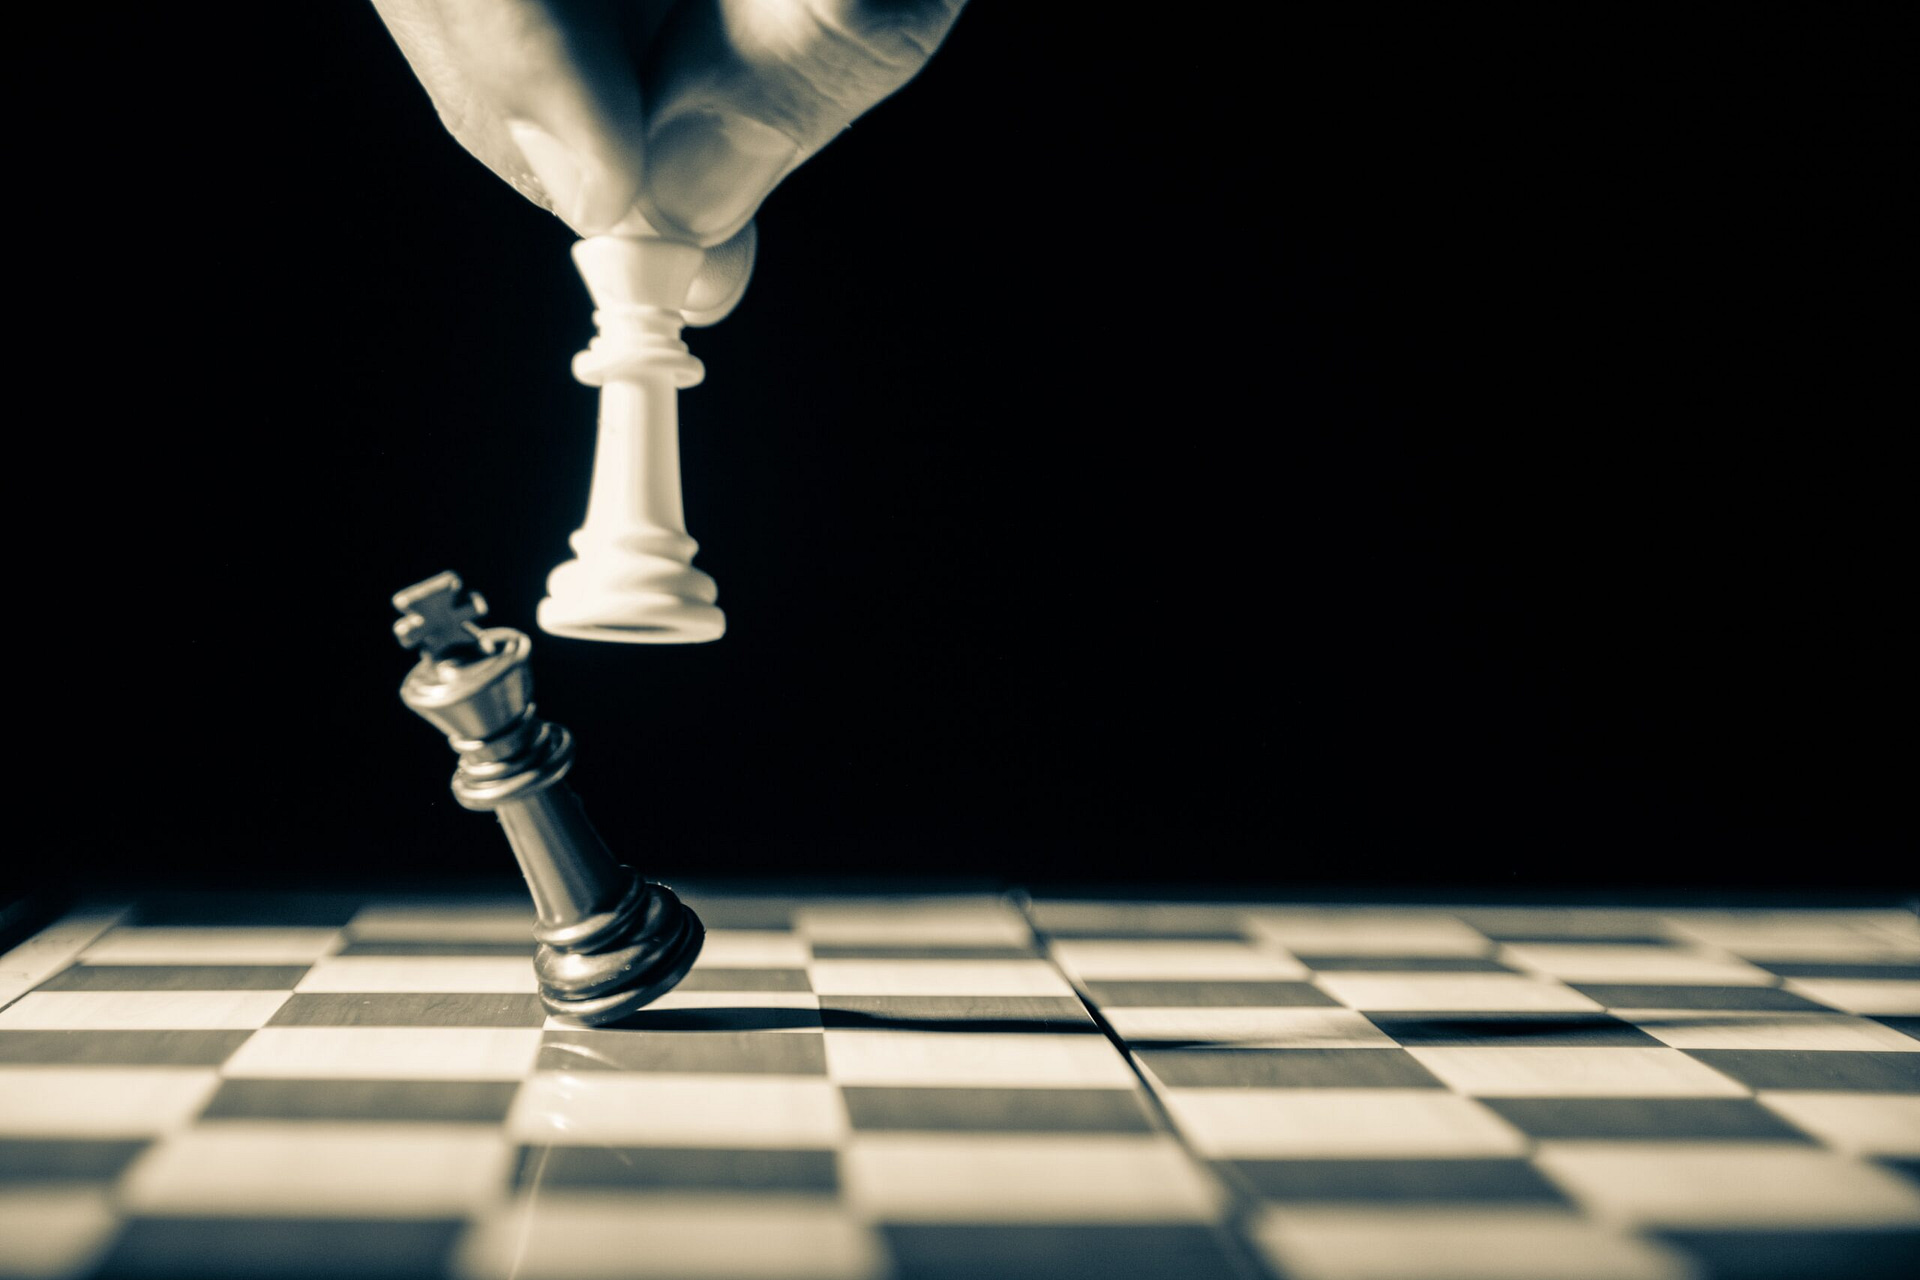 Creative' AlphaZero leads way for chess computers and, maybe